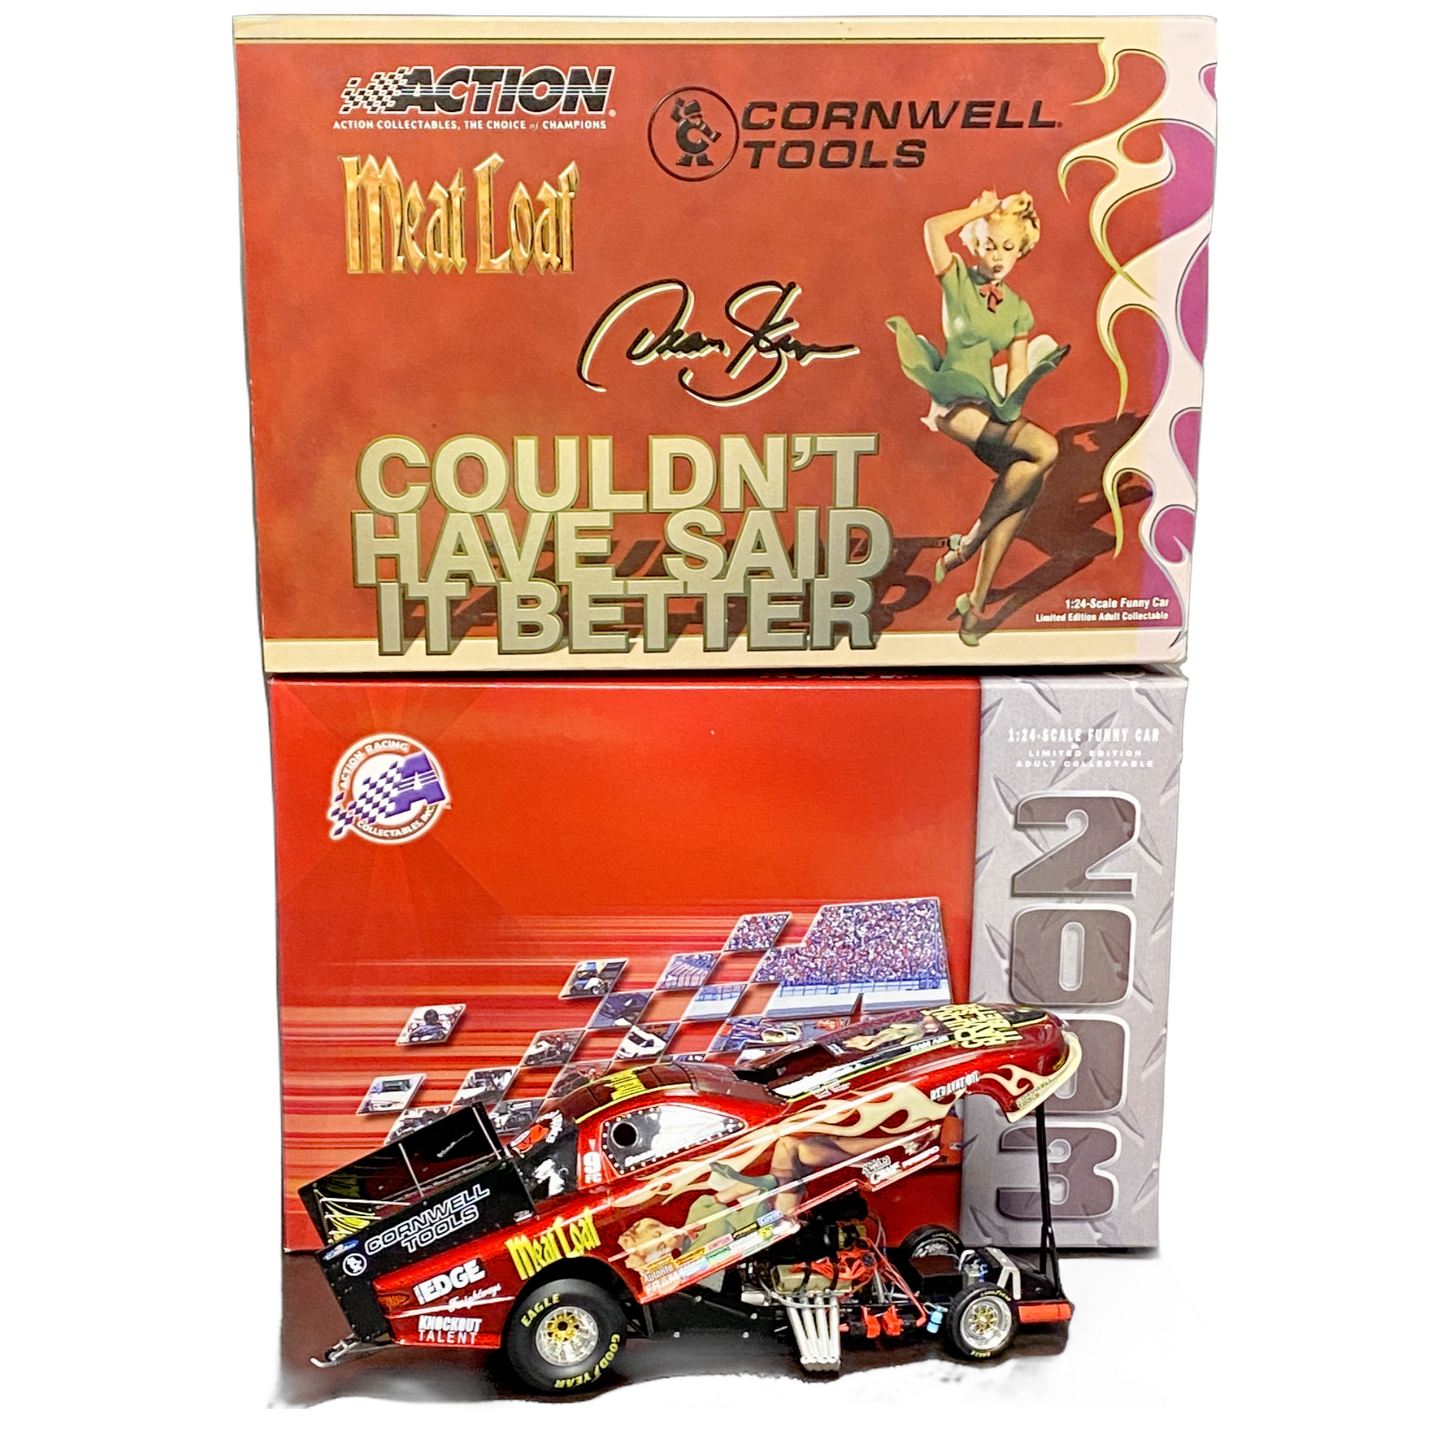 1/24 Scale 2003 Dean Skuza Funny Car Cornwell Tools/Meatloaf Firebird - Action Collectibles